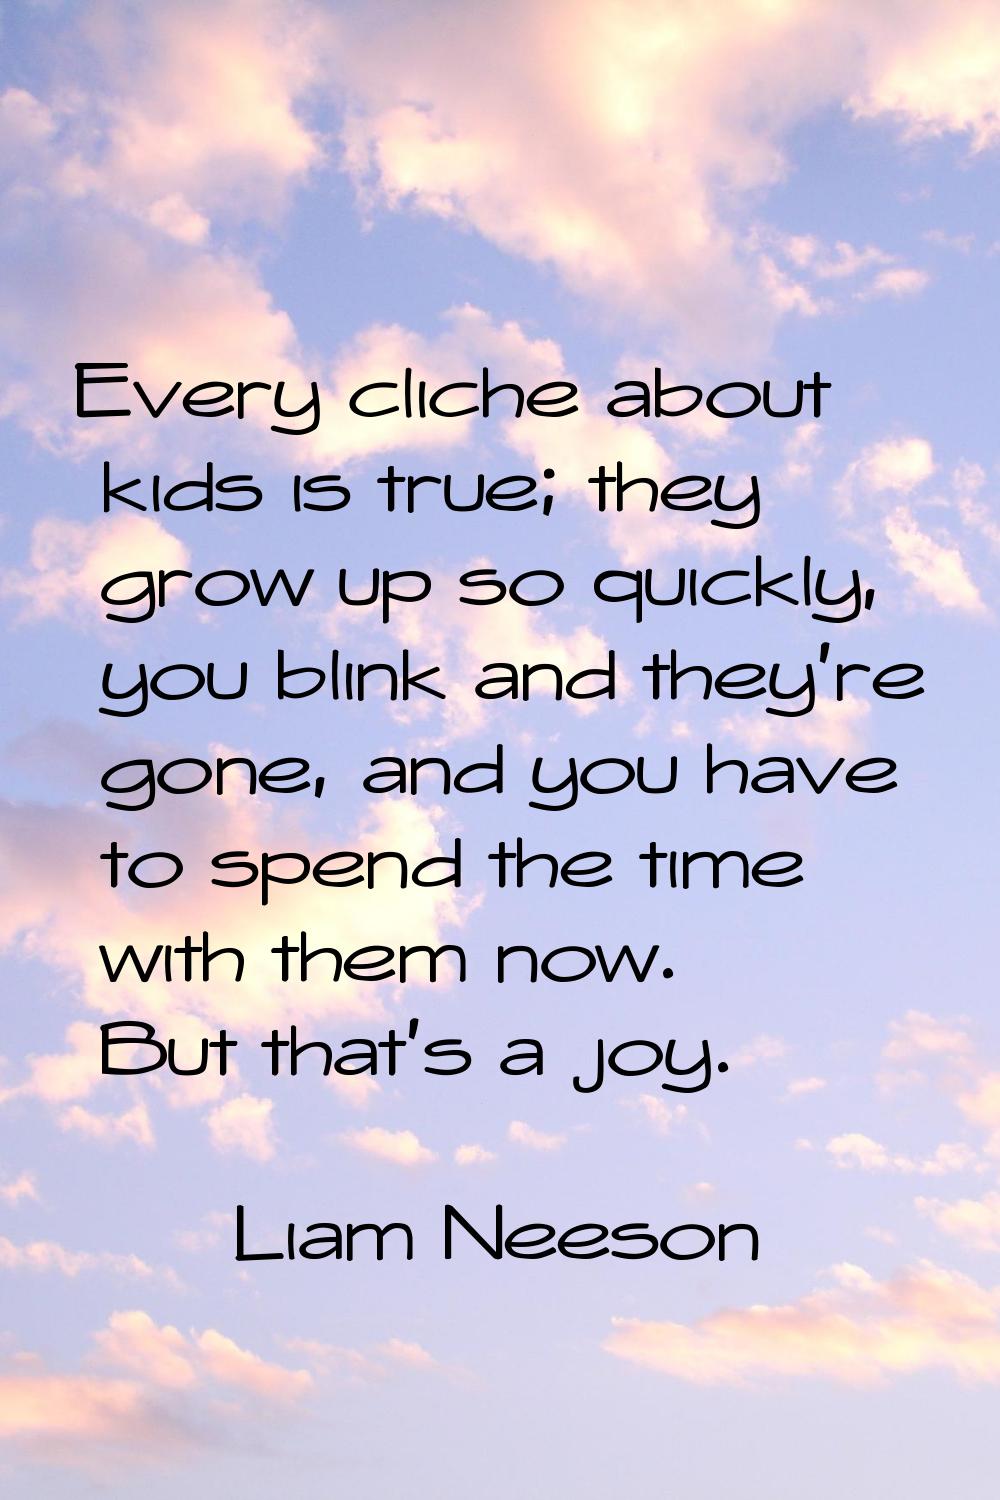 Every cliche about kids is true; they grow up so quickly, you blink and they're gone, and you have 